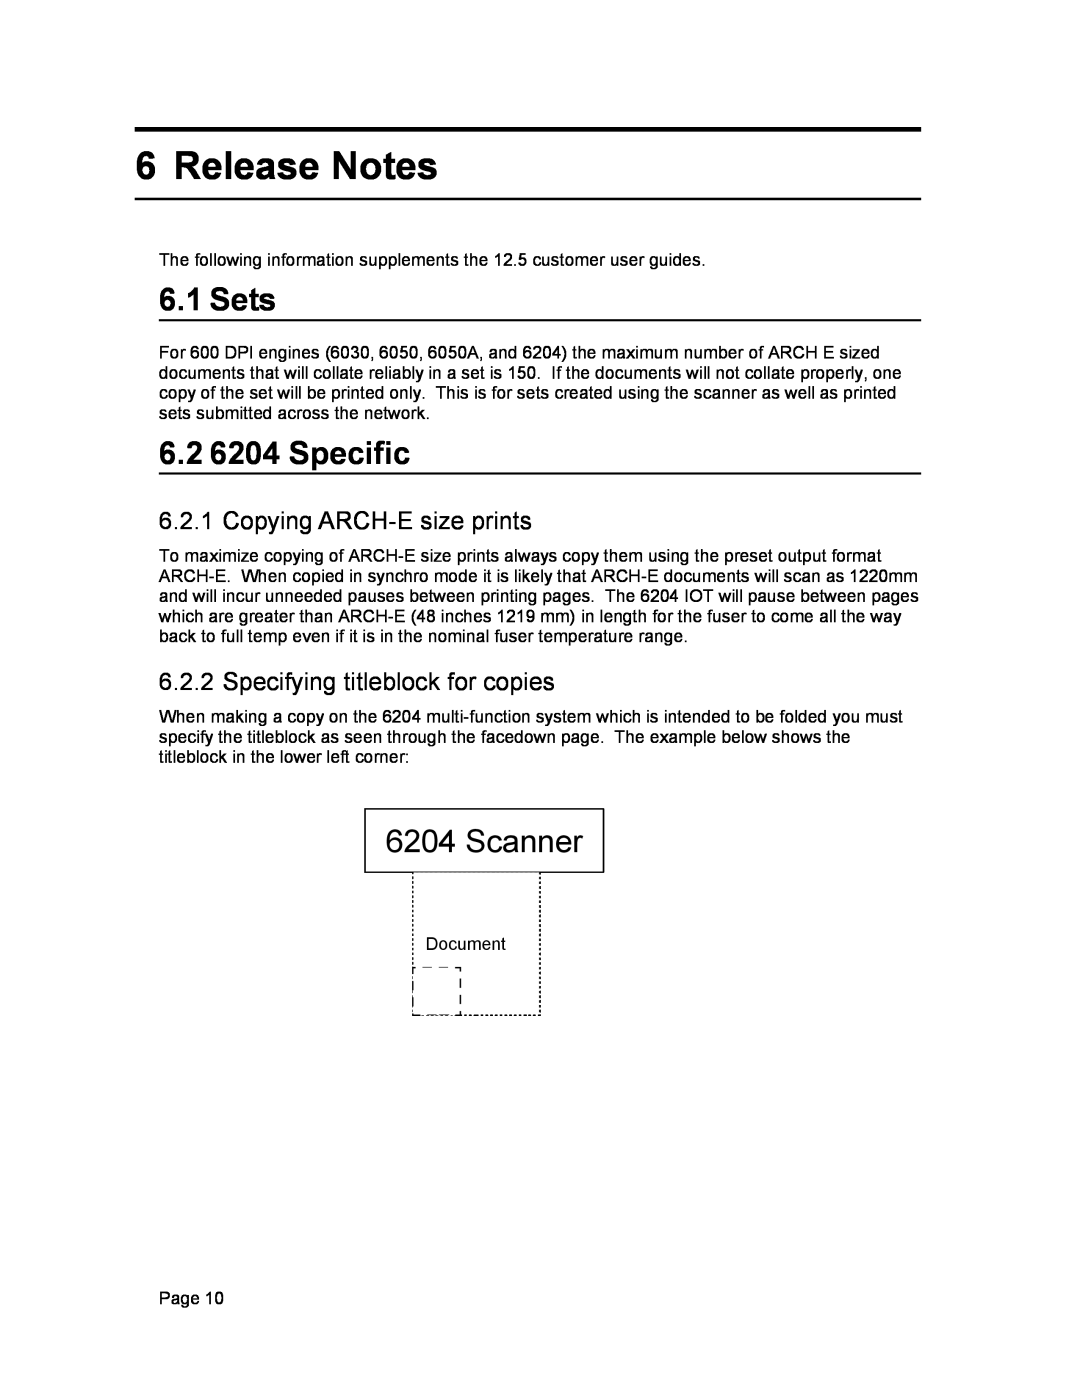 Xerox 12.7 B 114 manual Release Notes, Sets, 6.2 6204 Specific, Scanner, Copying ARCH-Esize prints 